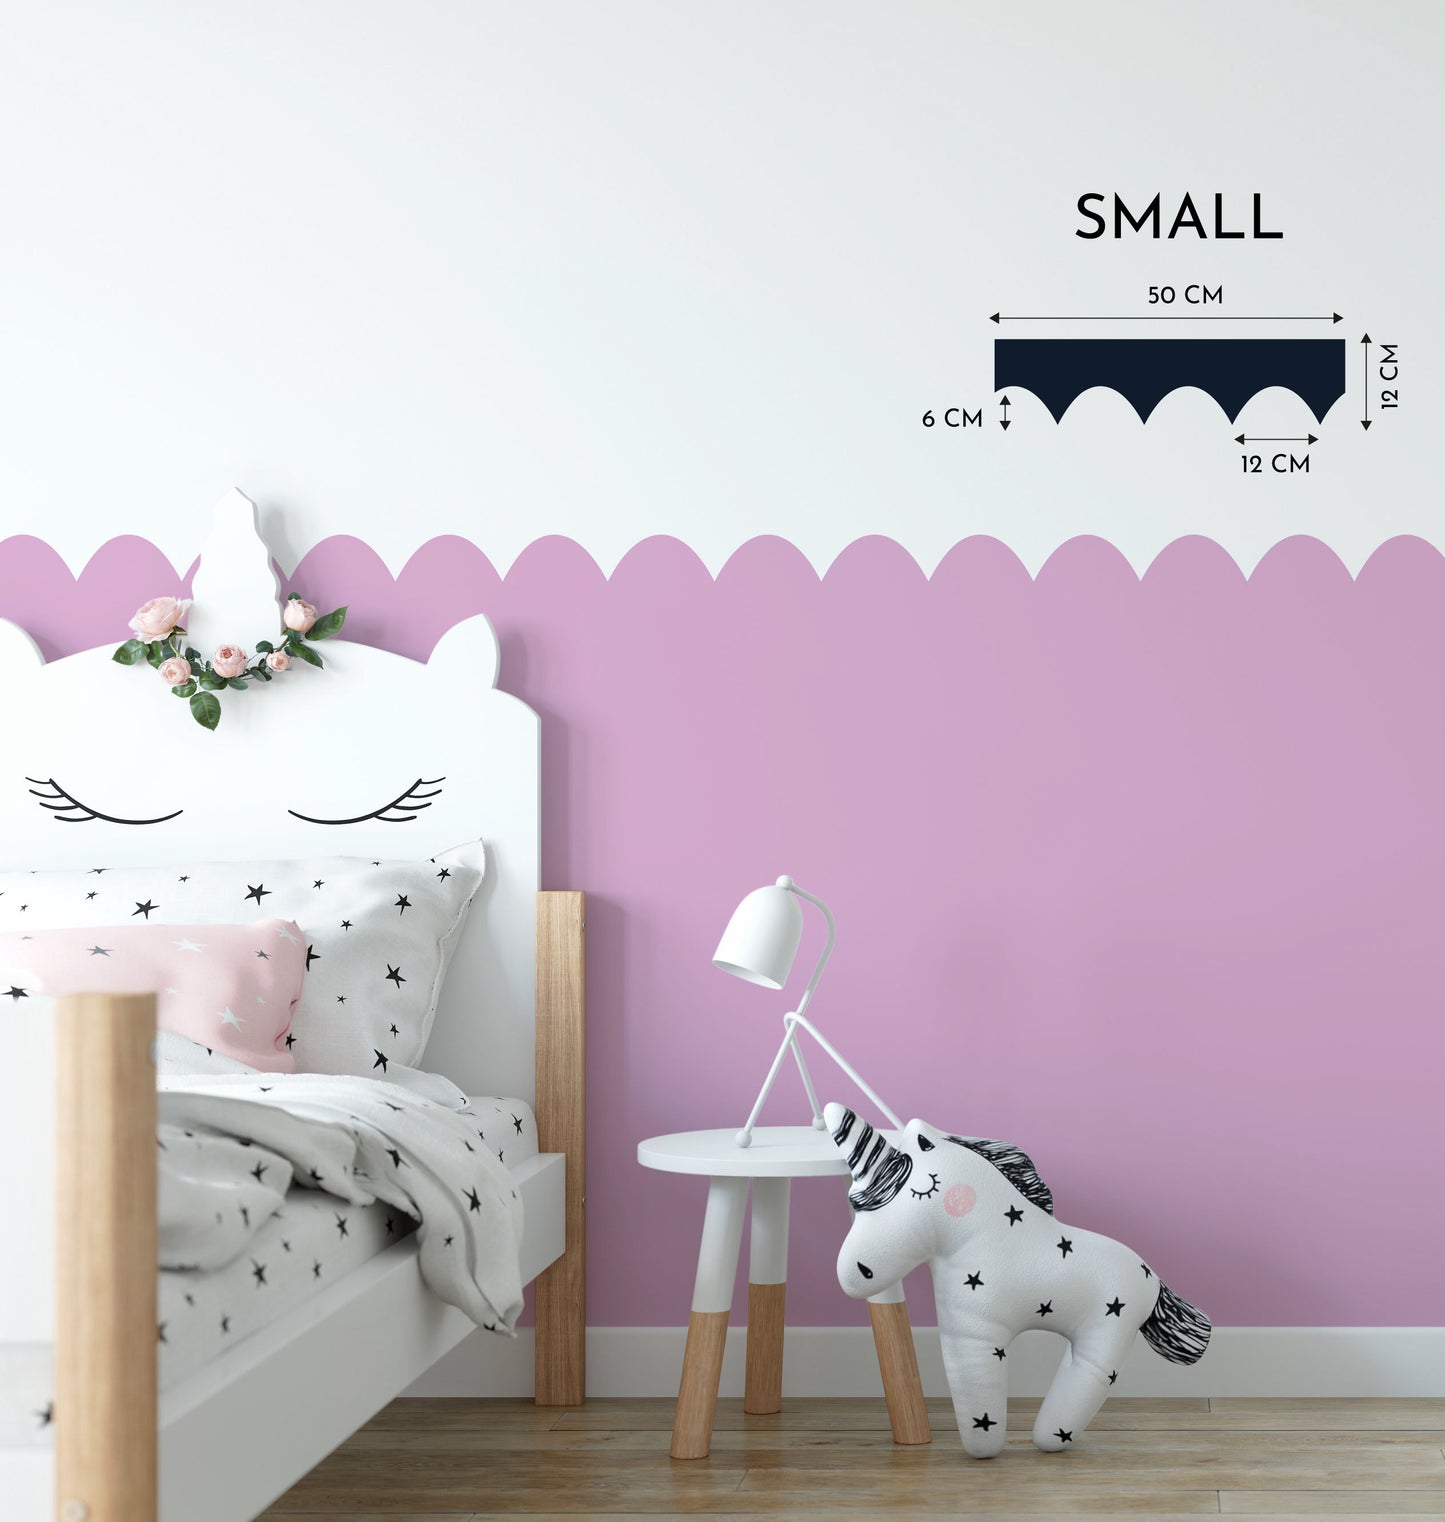 Scallops Wall Painting Stencil For Wall Boarders | Wall Boarder Template | Nursery Painting Stencils For Wall Art - Fake Wallpaper